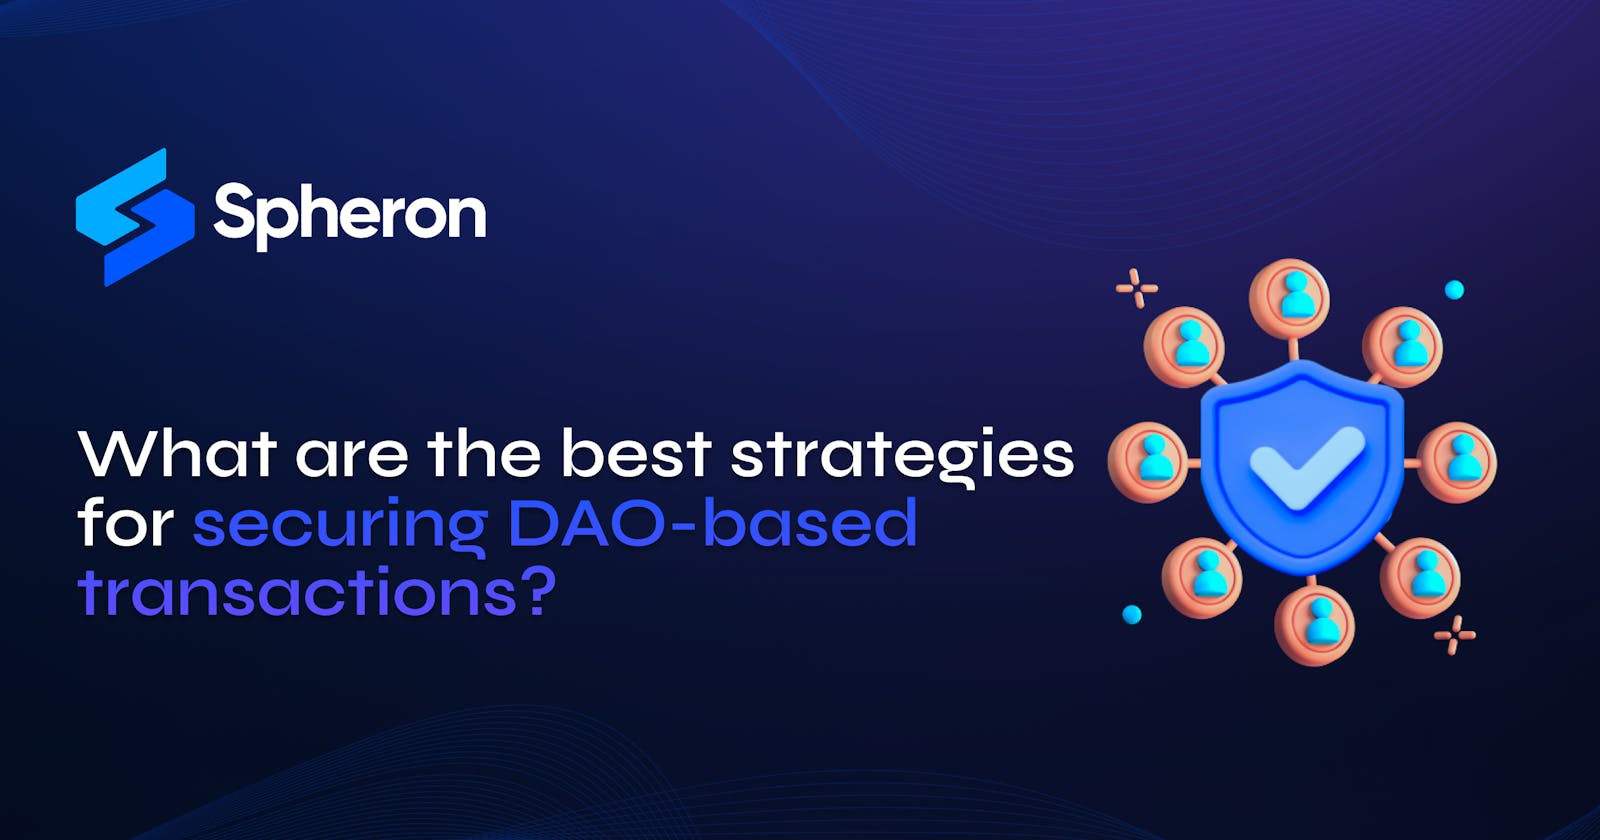 What are the best strategies for securing DAO-based transactions?